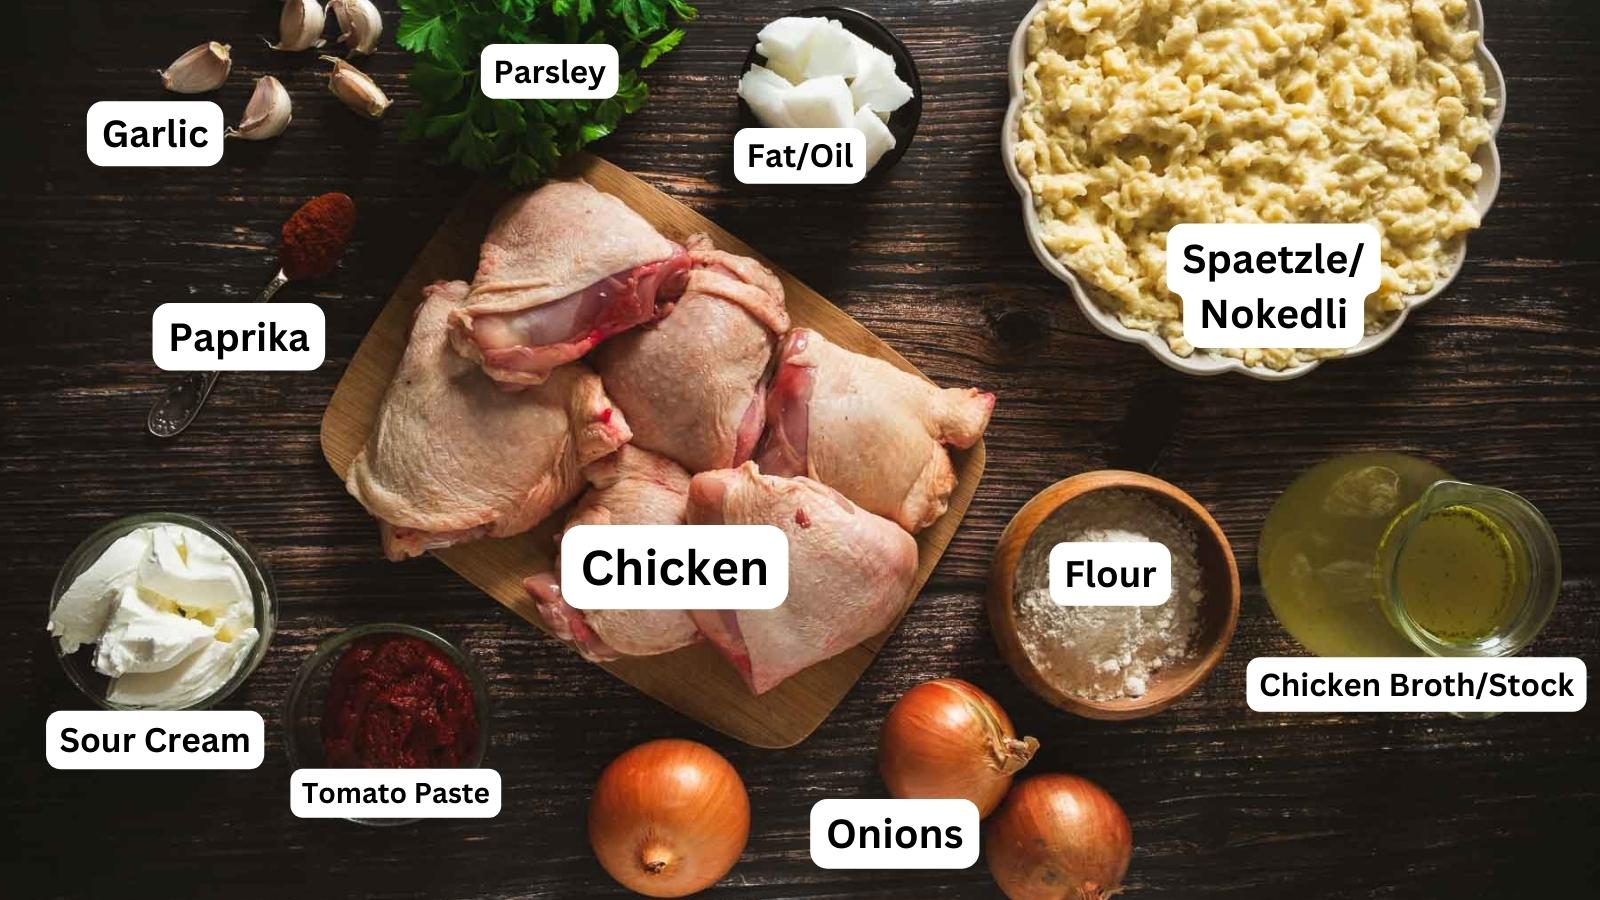 All of the ingredients needed to make authentic Hungarian chicken paprikash.